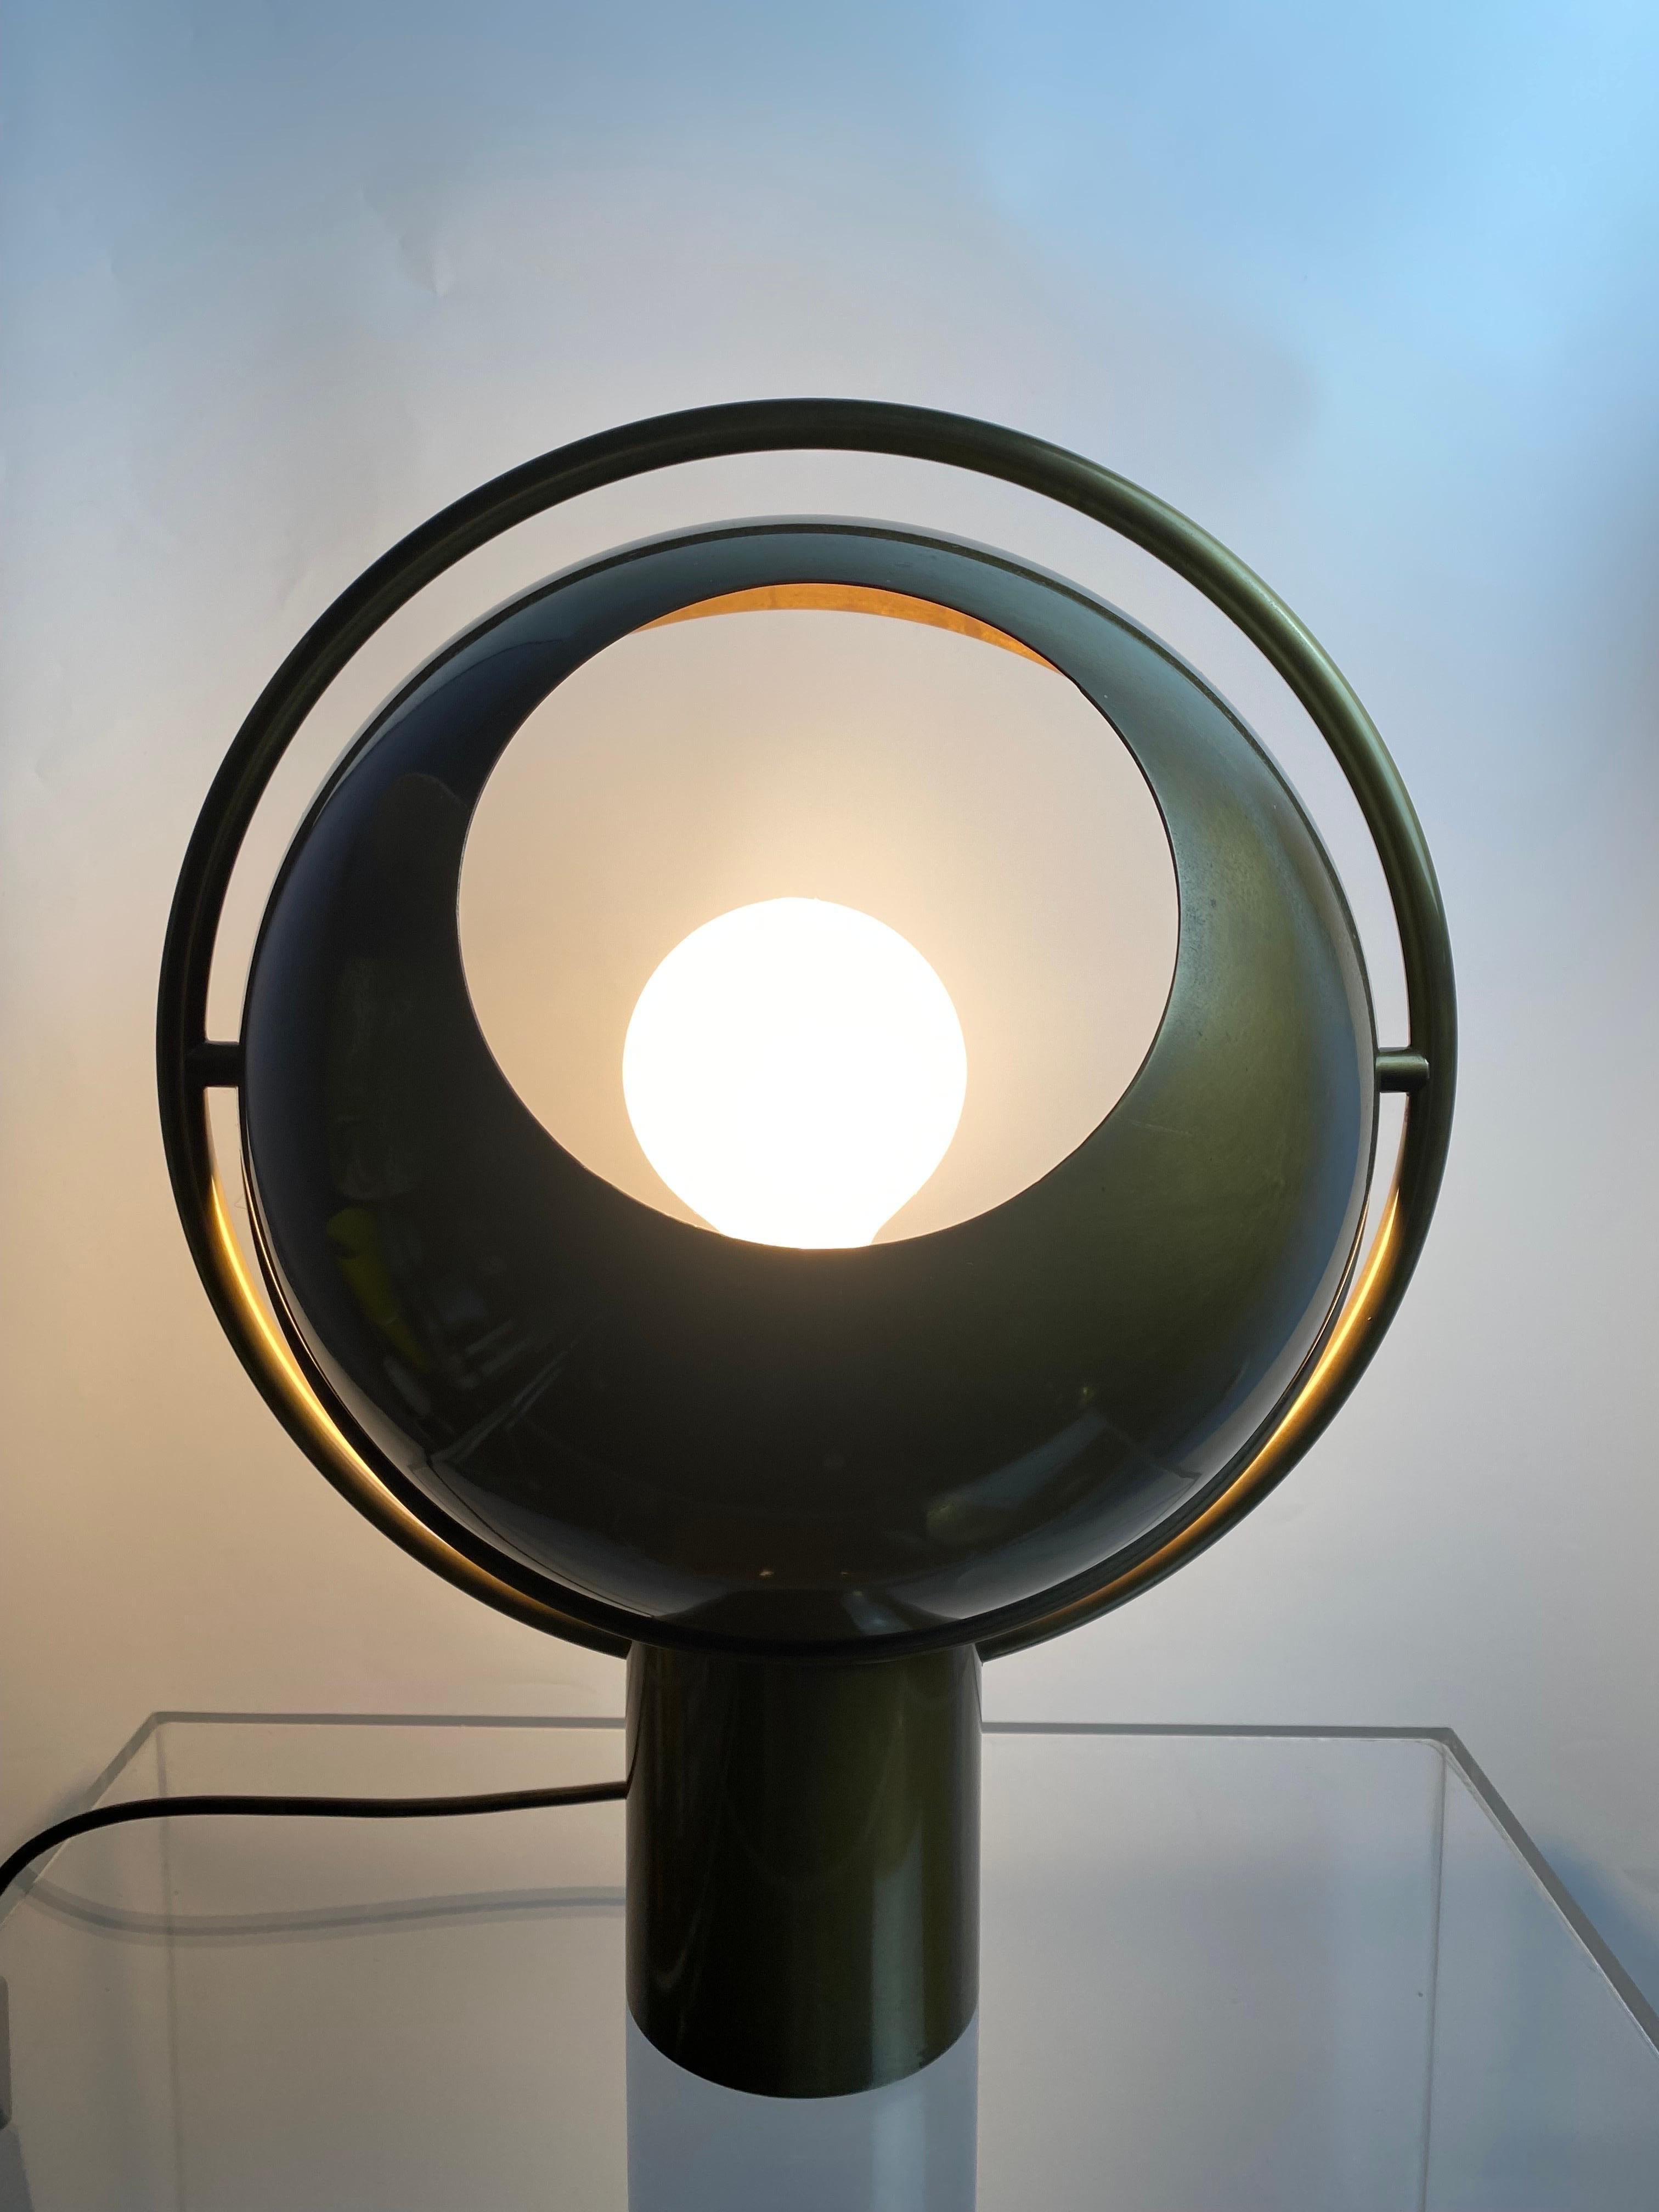 Rare German Midcentury Table Lamp in Solid Brass by Günter&Florian Schulz 1970s For Sale 1